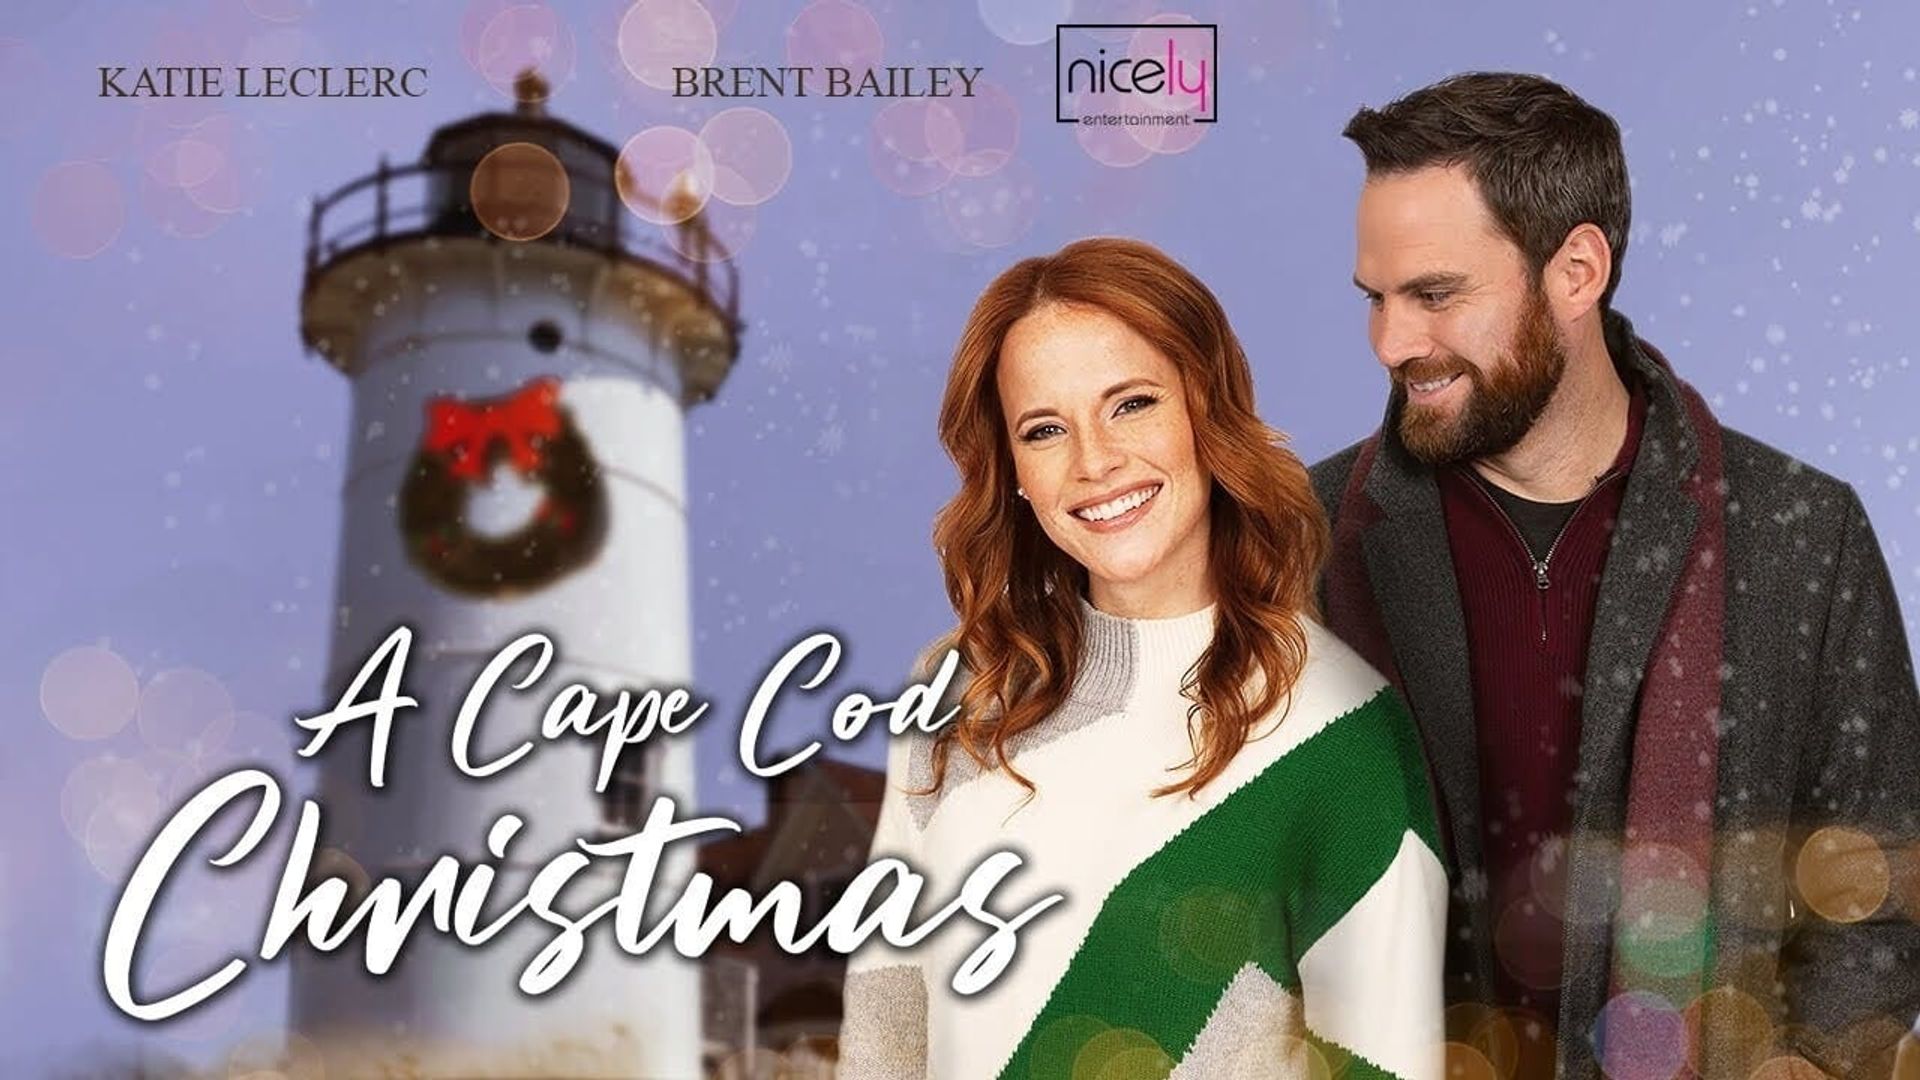 A Cape Cod Christmas background